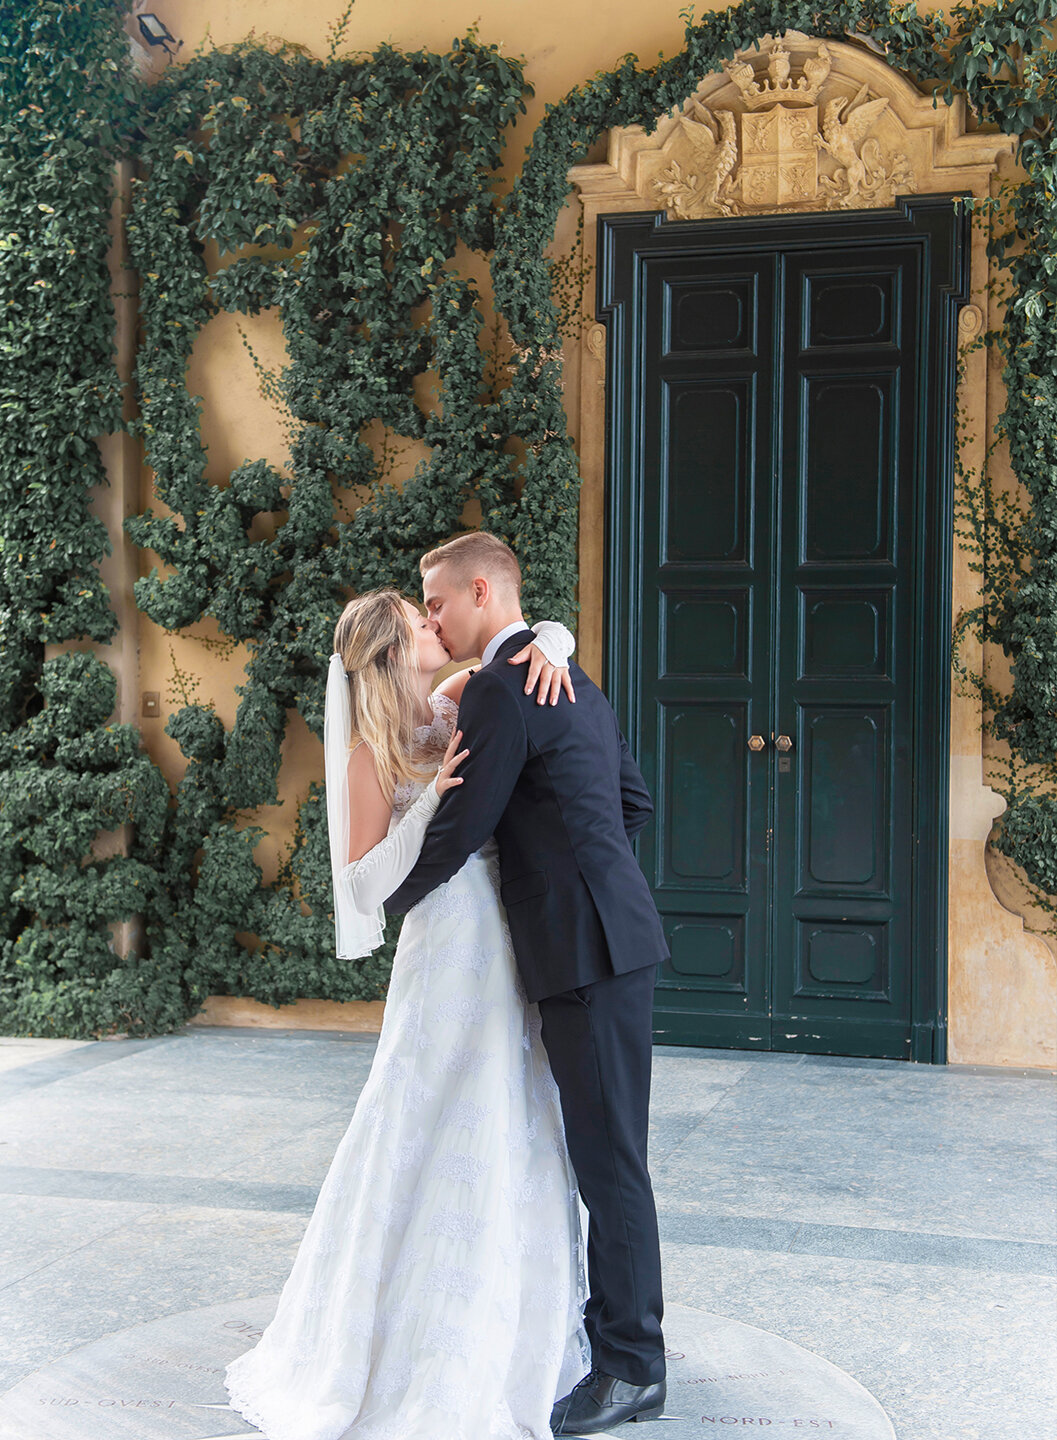 Andrea and Jo kissing in front of a flowery doorway